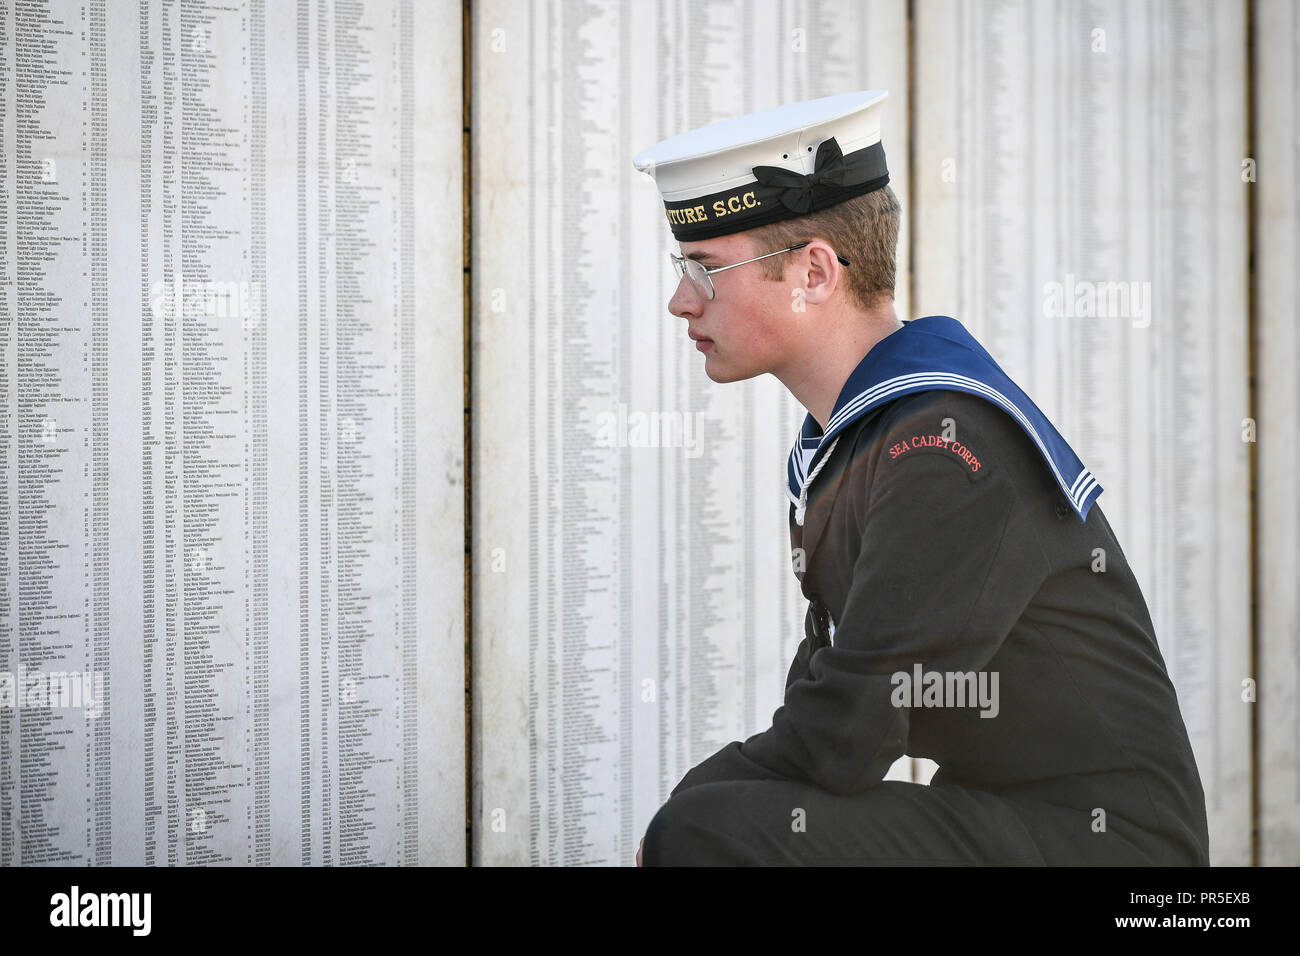 Sea cadet Jack Pacemen, 15, reads some of the 72,396 names representing Commonwealth servicemen killed at the Somme, which is part of the Shrouds of the Somme artwork by artist Robert Heard, at Aerospace Bristol. The exhibition, featuring a 45 metre trench lined with thousands of hand-stitched calico shrouded figures, each measuring 12 inches long, runs until 14th October at the South Gloucestershire site before heading to London's Queen Elizabeth Olympic Park between 8 - 18 November. Stock Photo